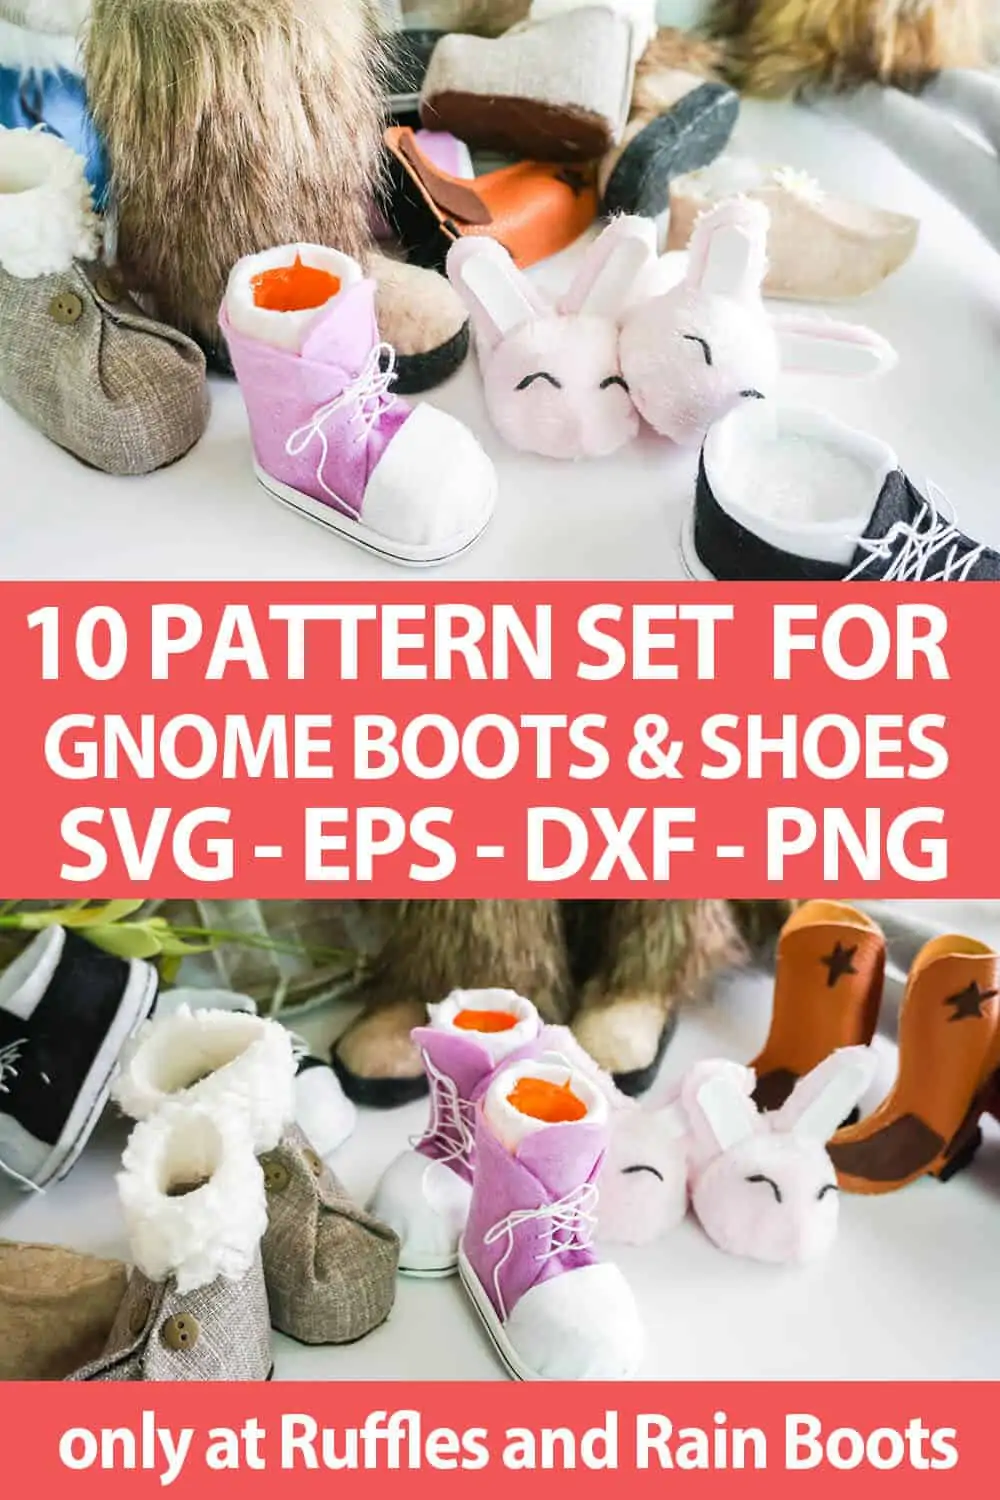 17 Gnome Boot and Shoe Patterns for Every Gnome Maker - Ruffles and Rain  Boots Shop